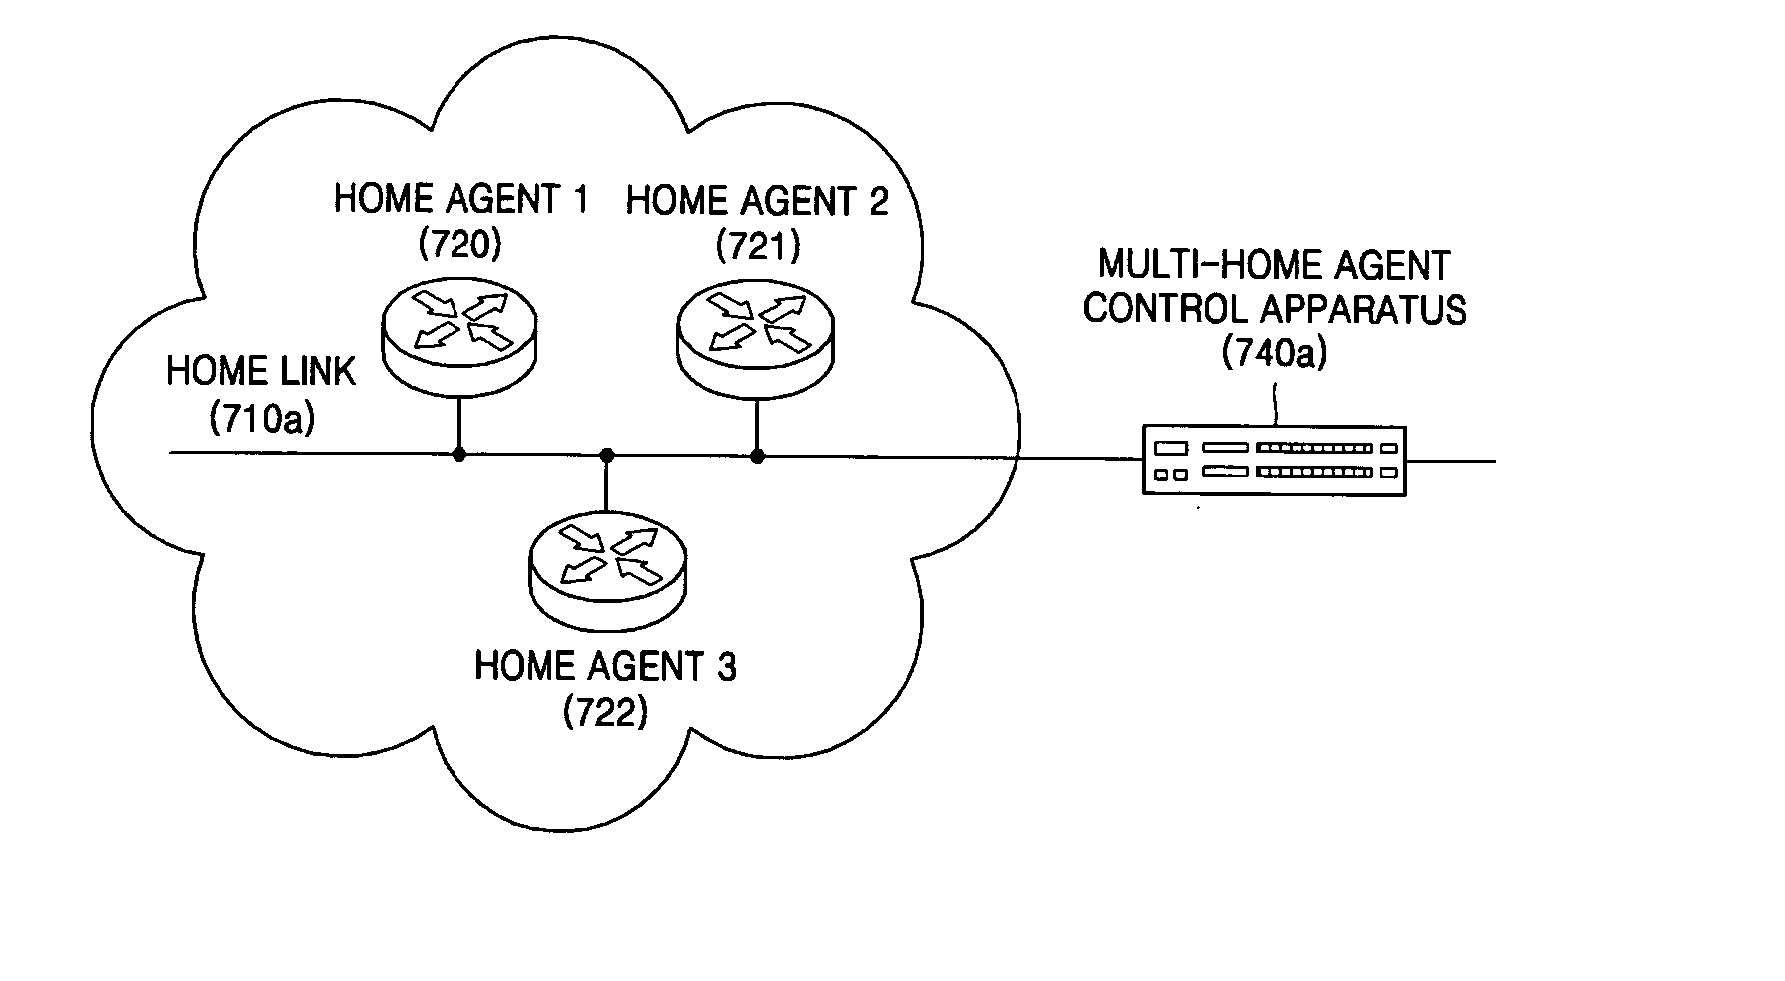 Multi-home agent control apparatus and method